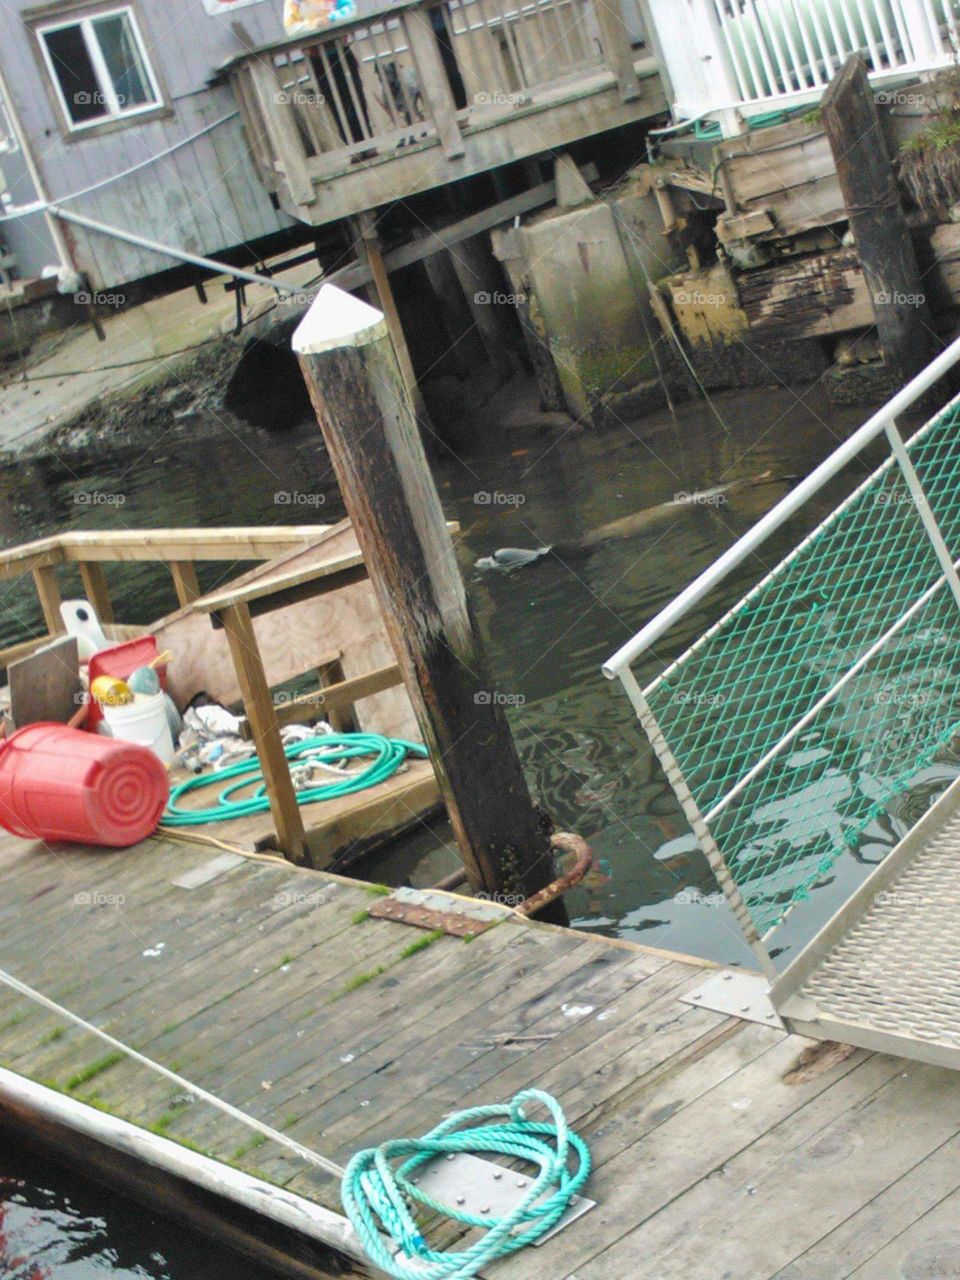 The sea lions hang out near the piers to get any food droppings, and they look like puppies (Fort Bragg, CA)